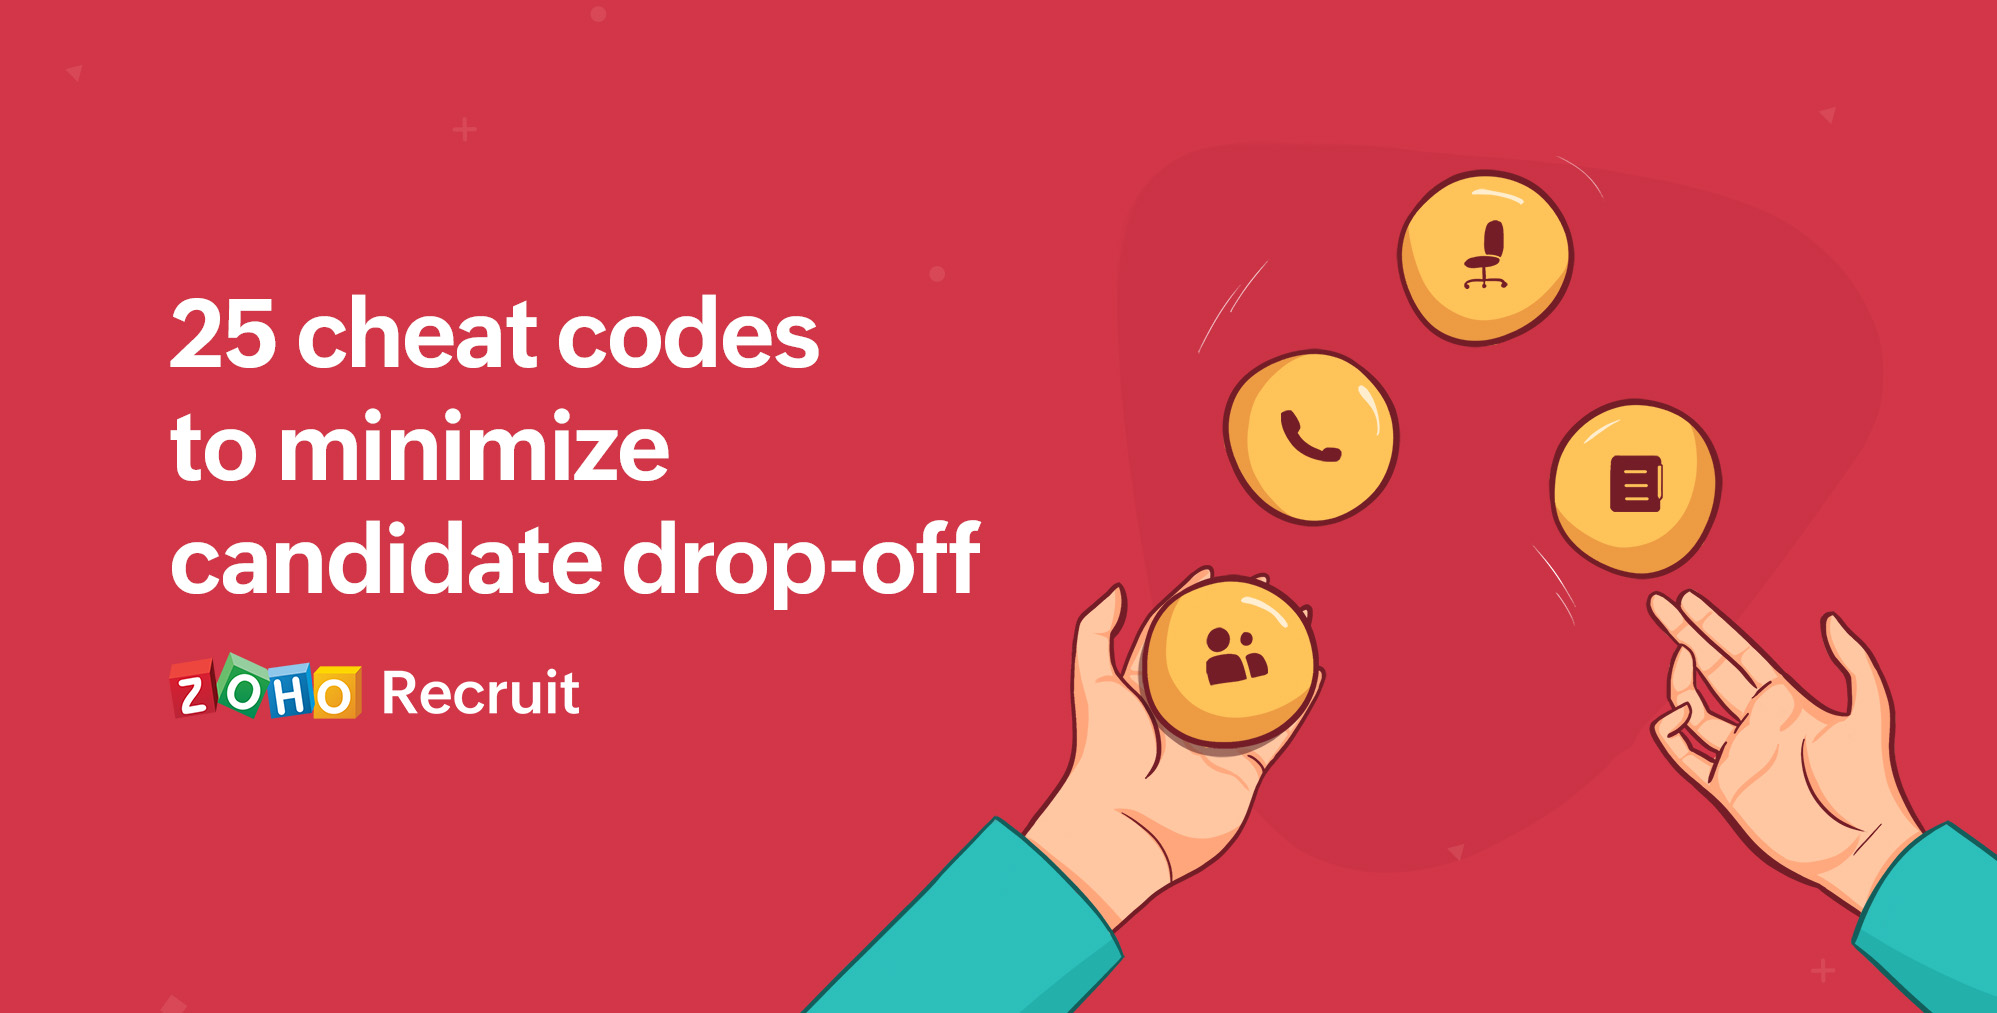 25 cheat codes to minimize candidate drop-off